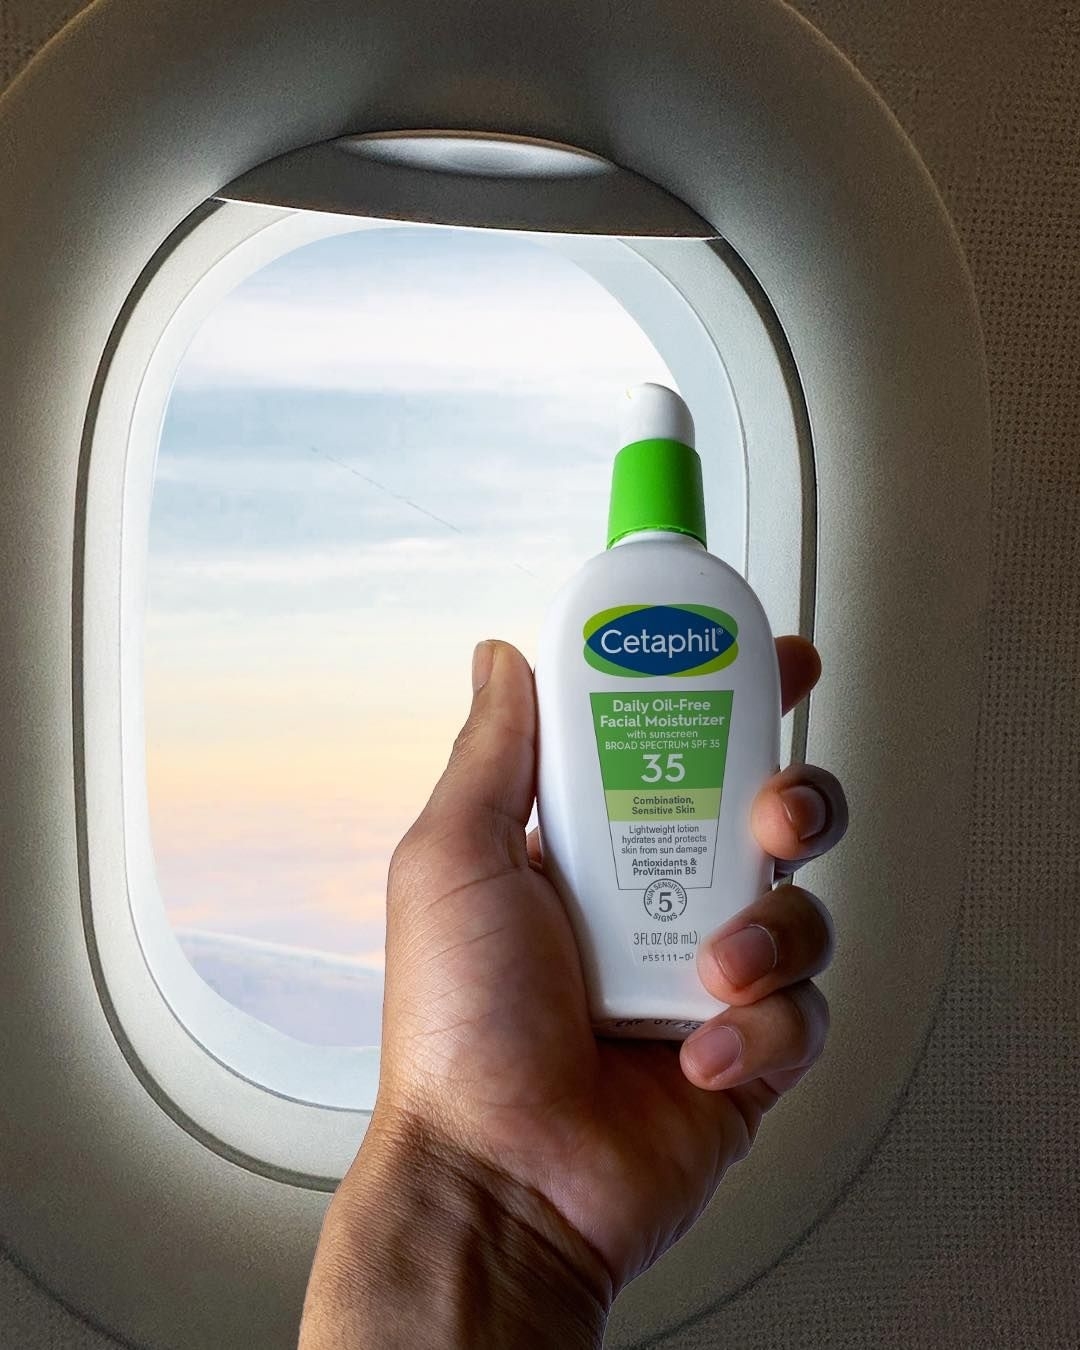 A model holding the sunscreen in front of an airplane window